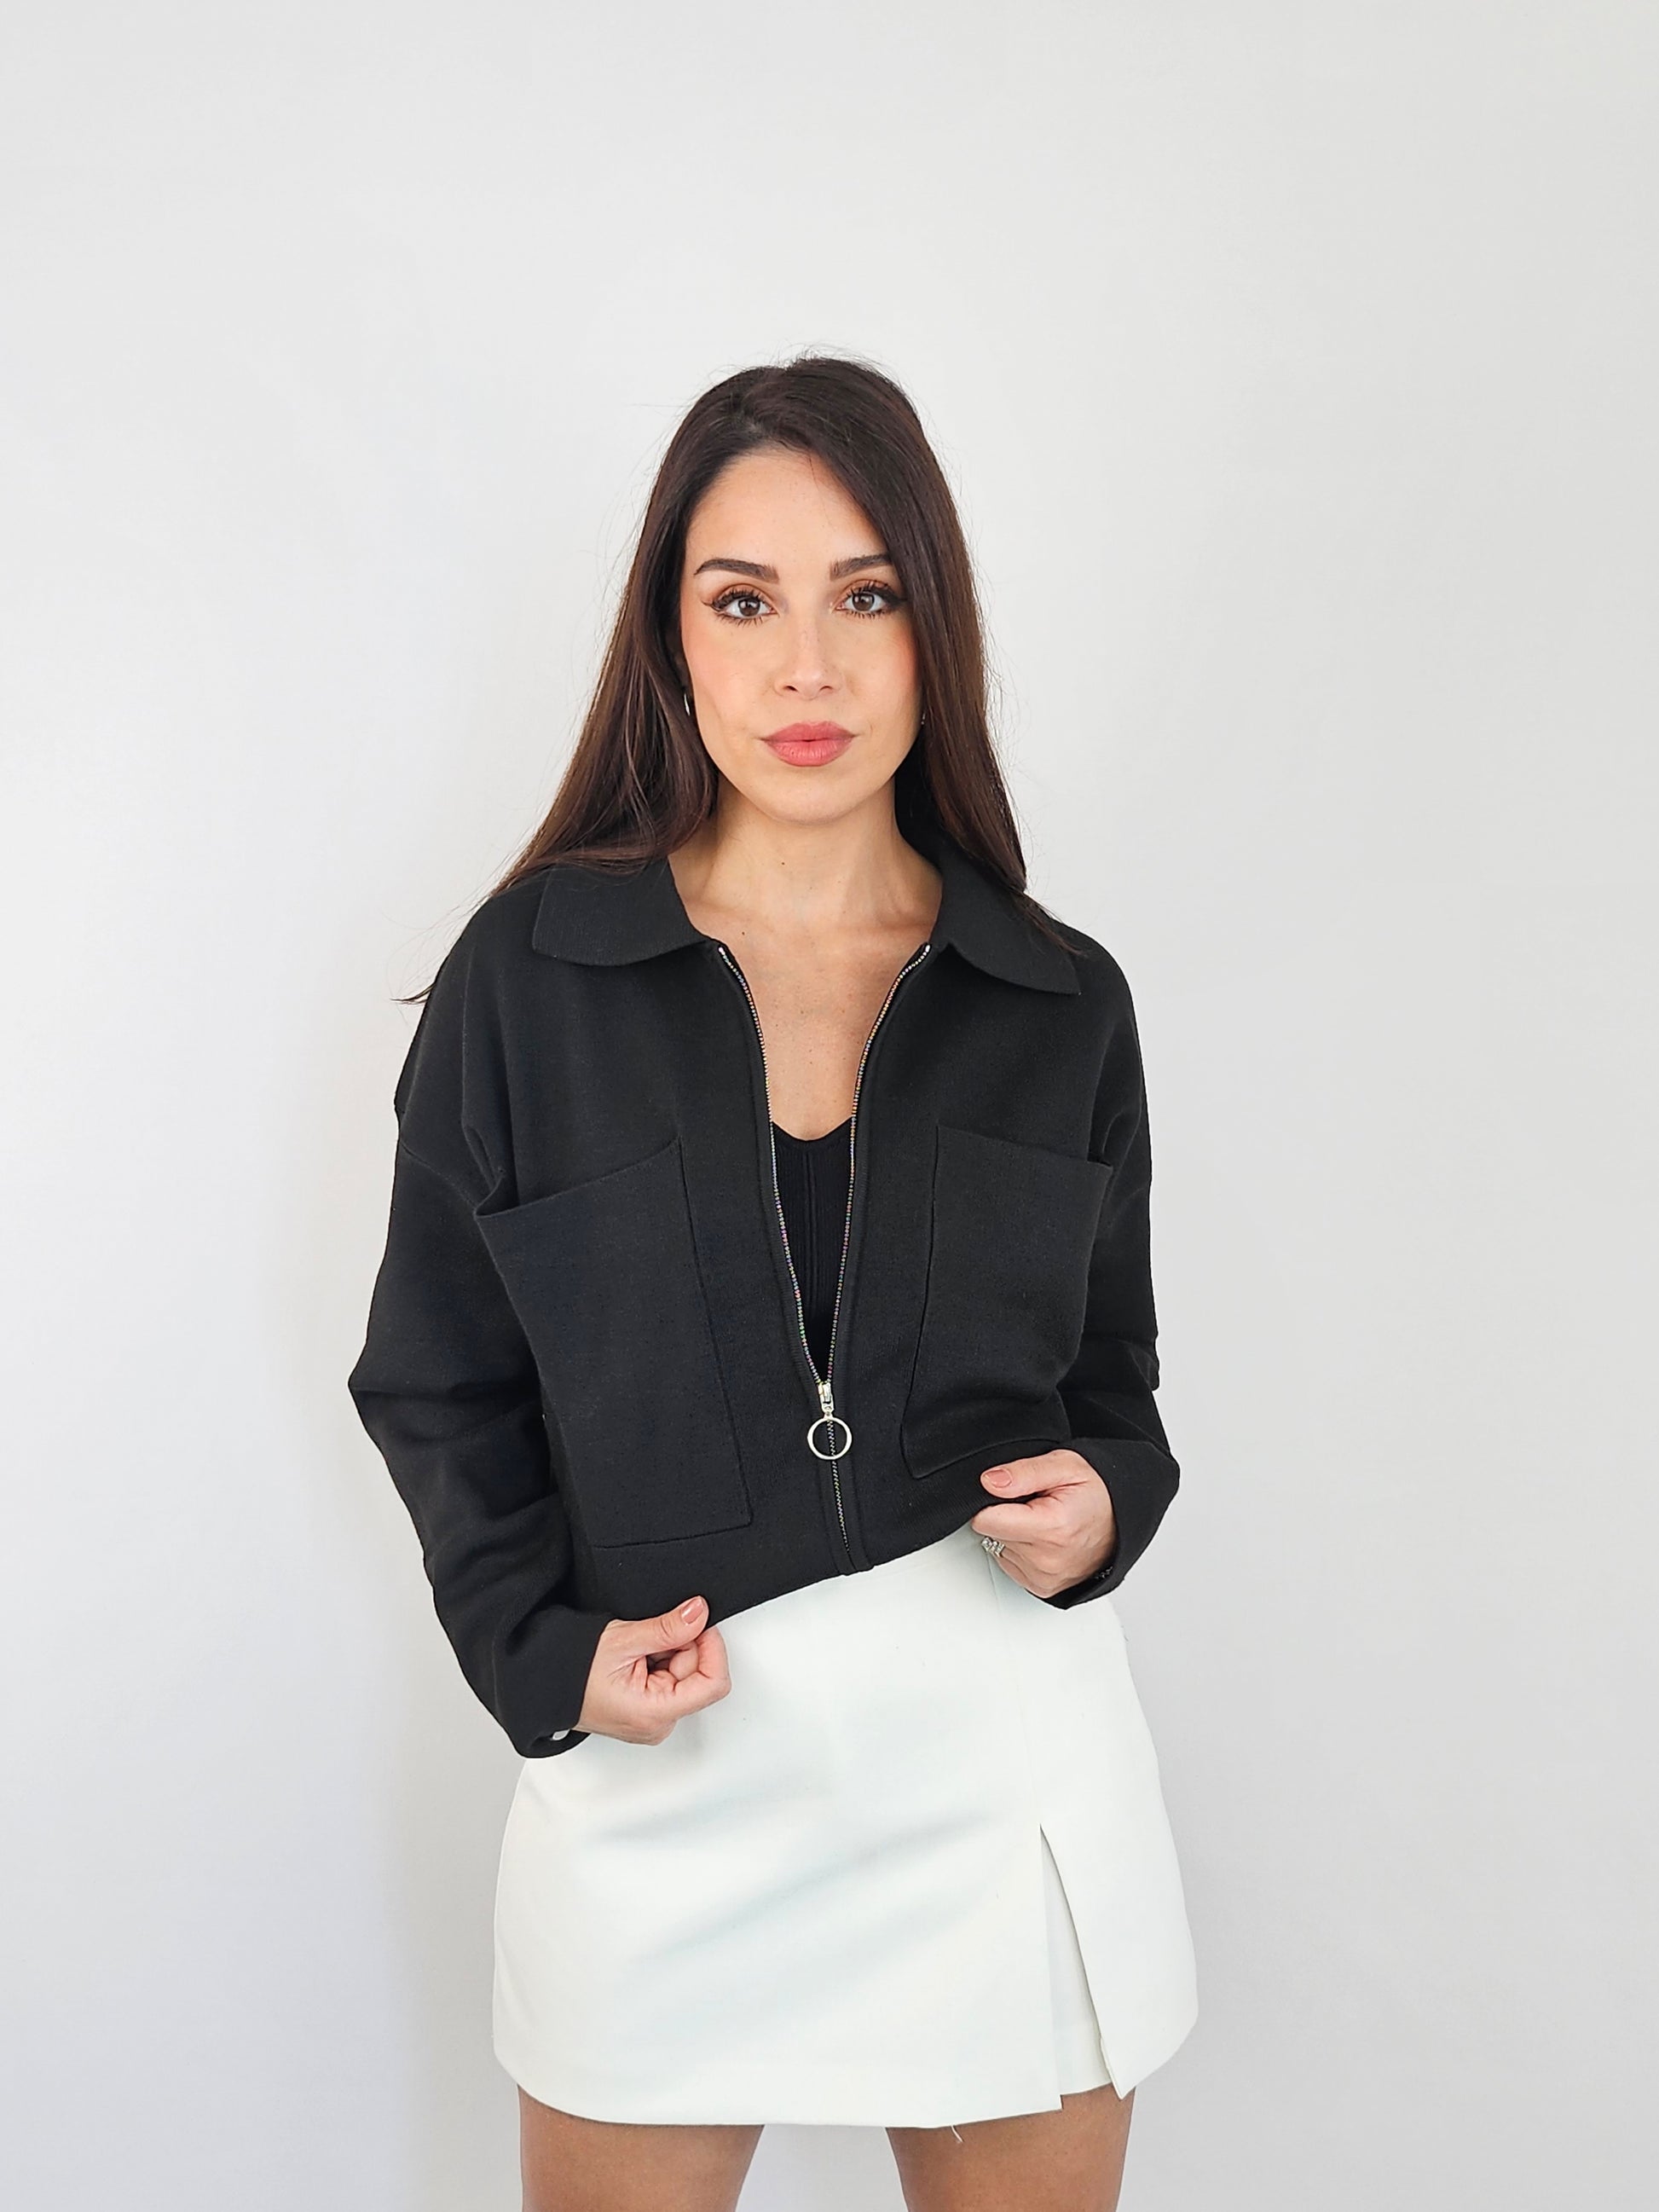 Black zip up jacket that can be worn in two ways crop or regular length. 